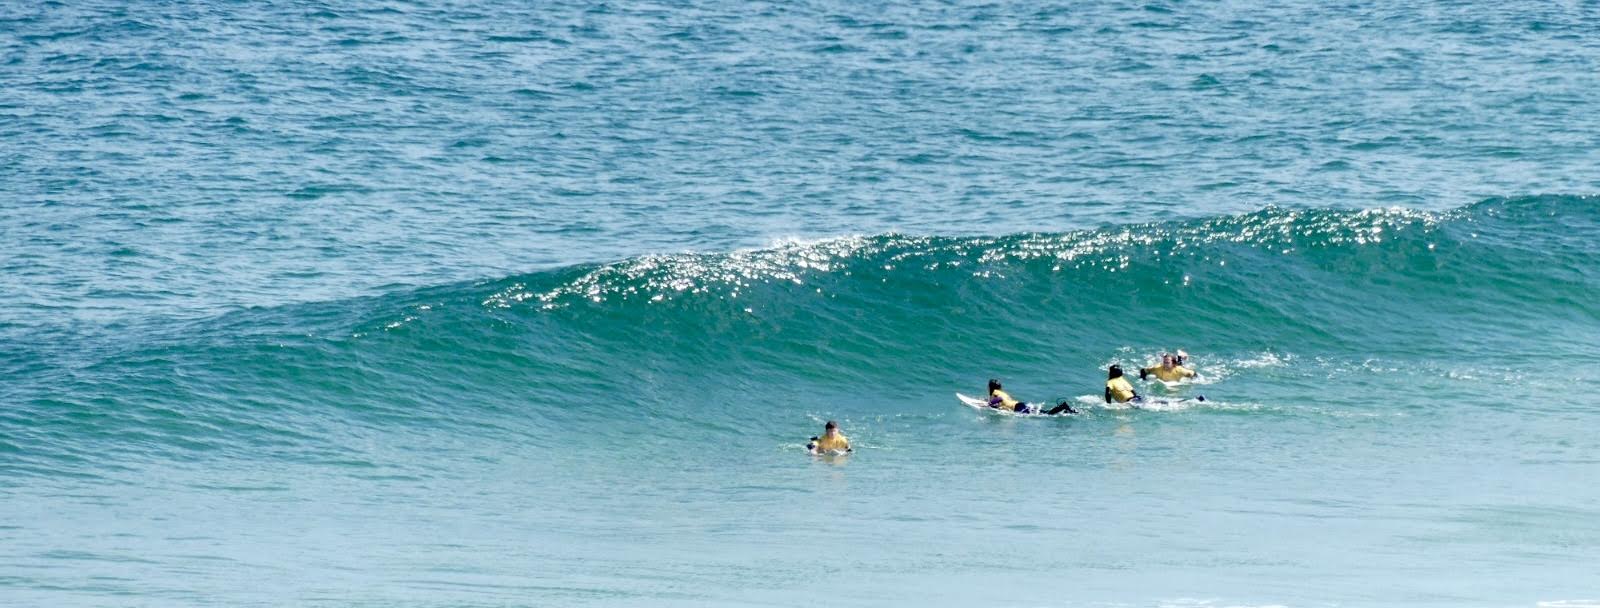 surfing 5 Nomad Surf Camp for Adults in Spain - Galicia retreats for adults surf camp lessons children teen summer young adult best nomad kid bali canggu beginners uluwatu france moliets portugal algarve lisbon